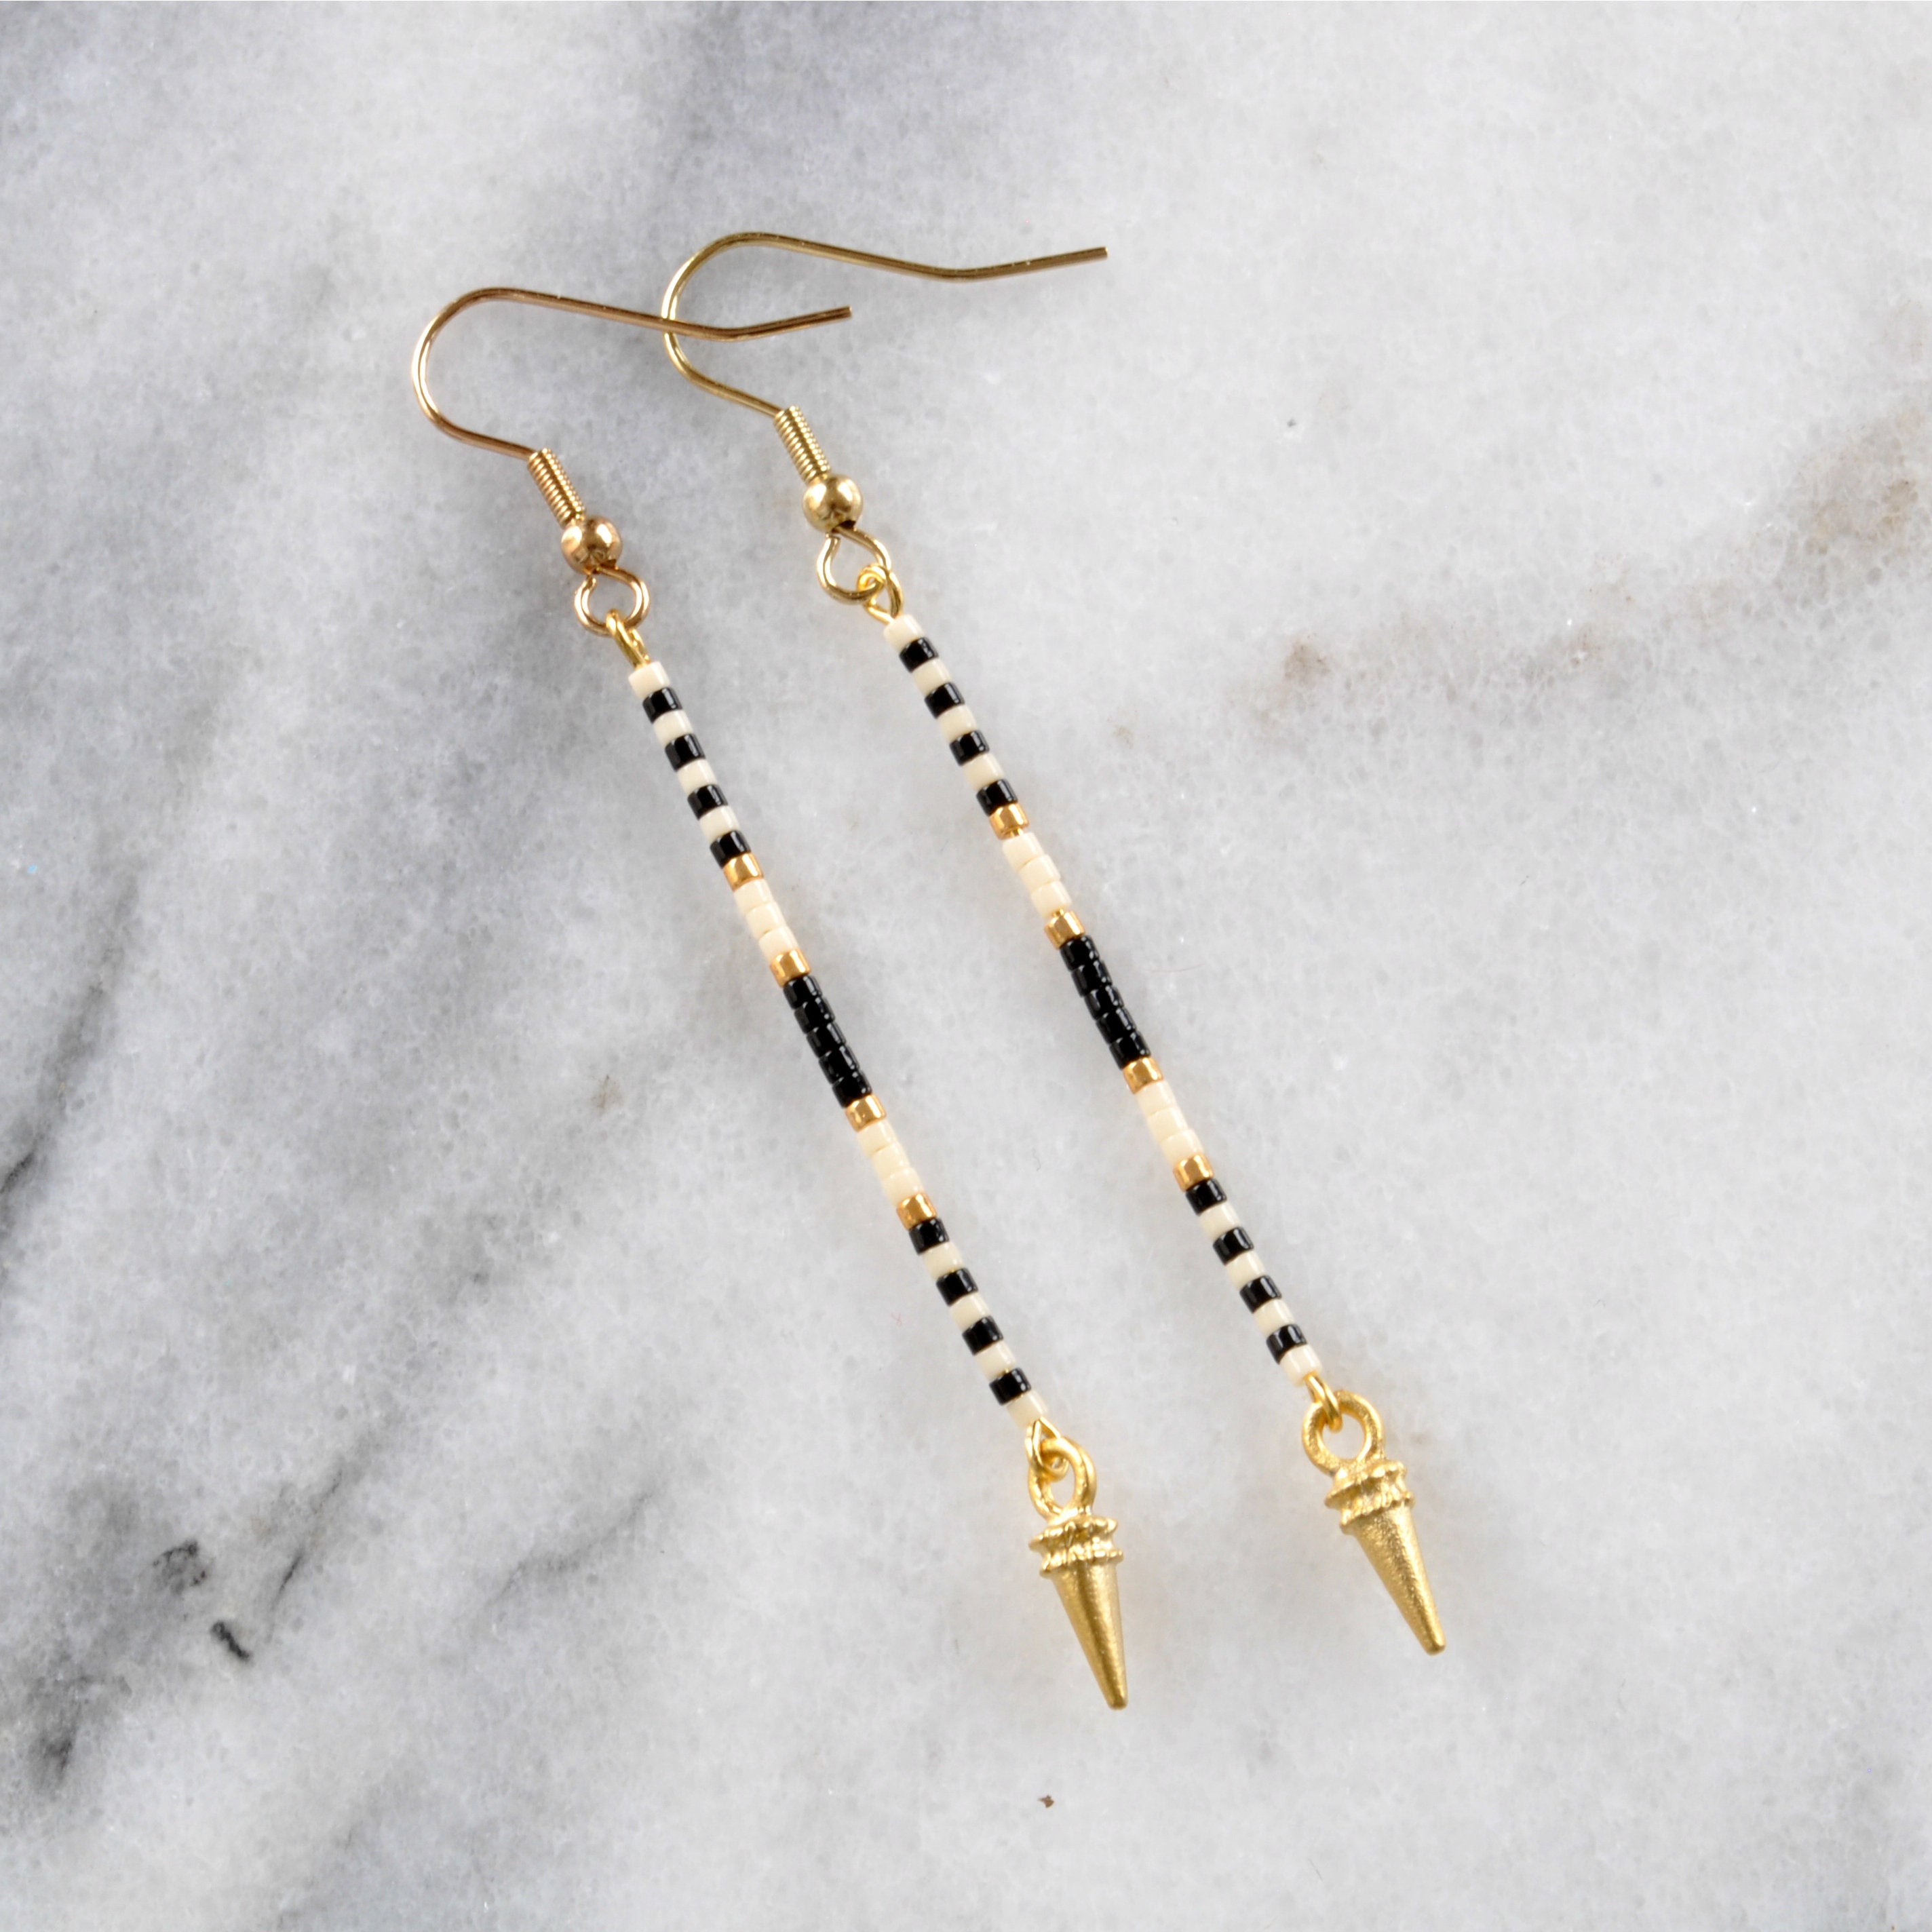 Long beaded earrings from Libby & Smee with a gold earwire and beaded pattern in Monochrome pattern with black, cream and gold beads